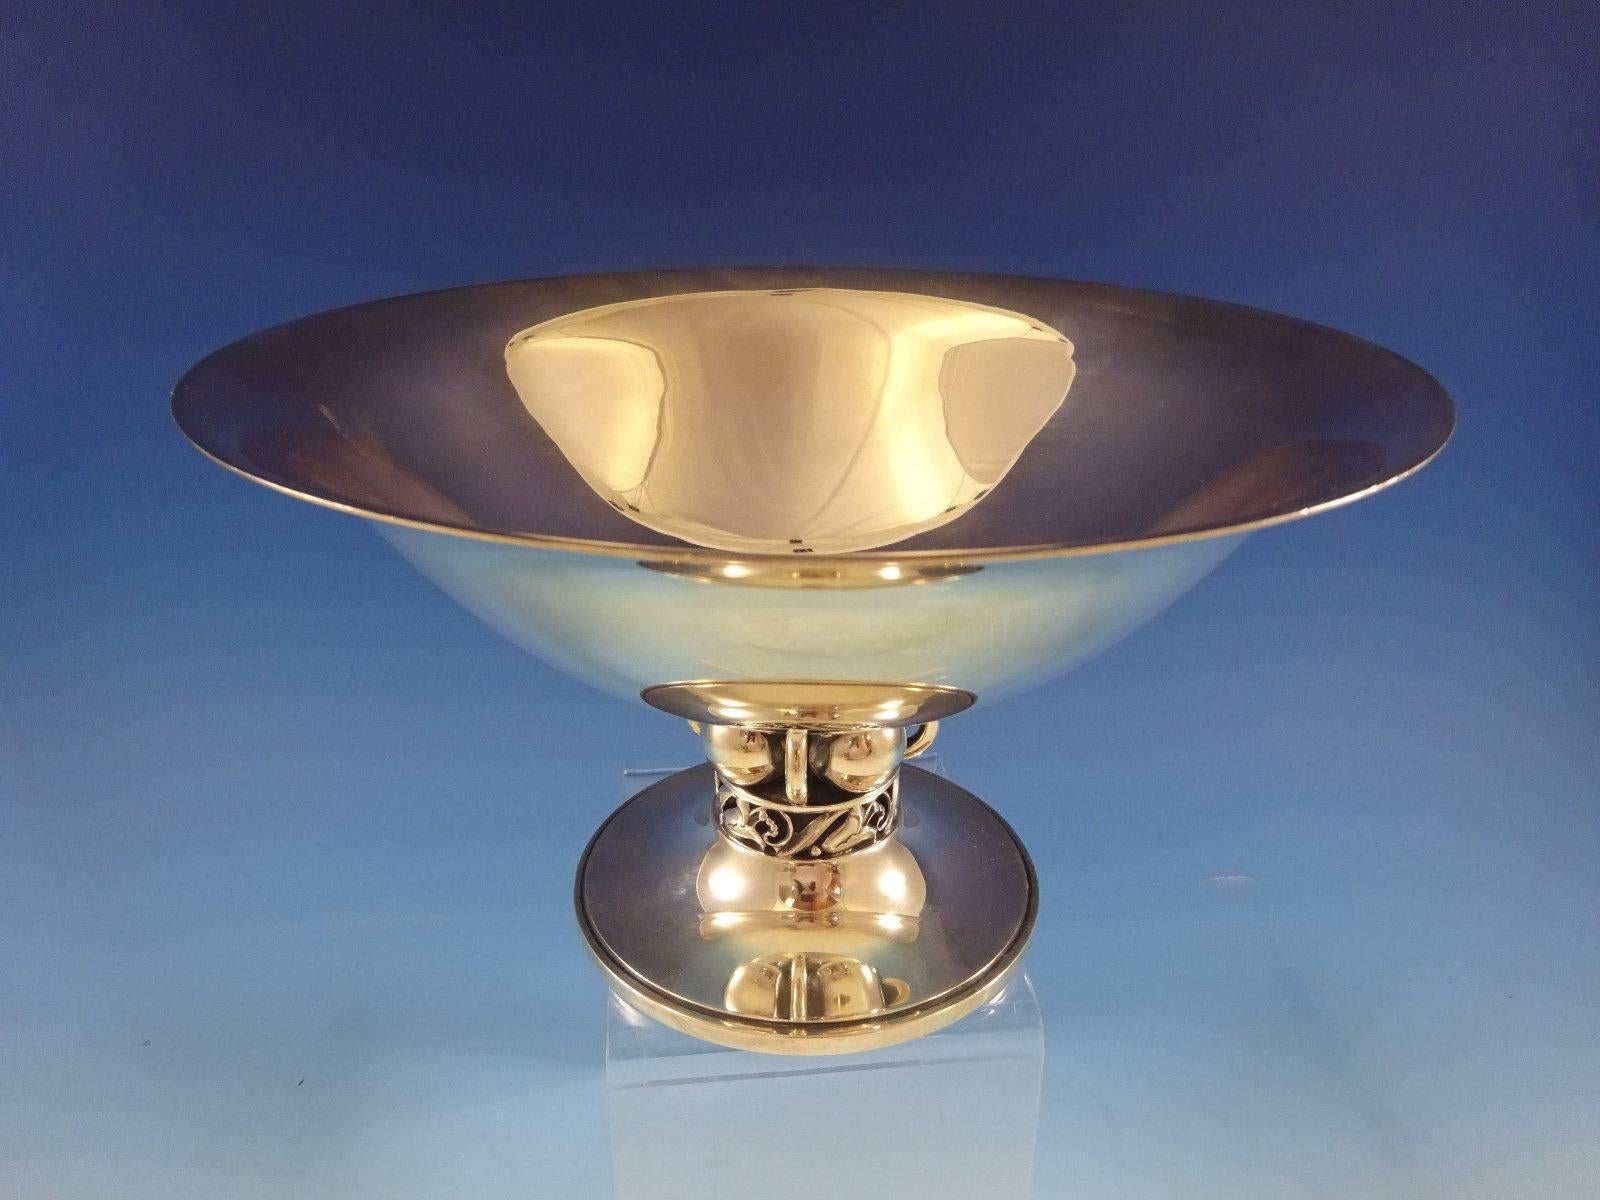 Designer Alphonse La Paglia (1907-1953) was a Sicilian-born silversmith who studied and trained with Georg Jensen. He designed this special line with Danish modernism influences for International in 1952, for only one year. La Paglia hollowware is